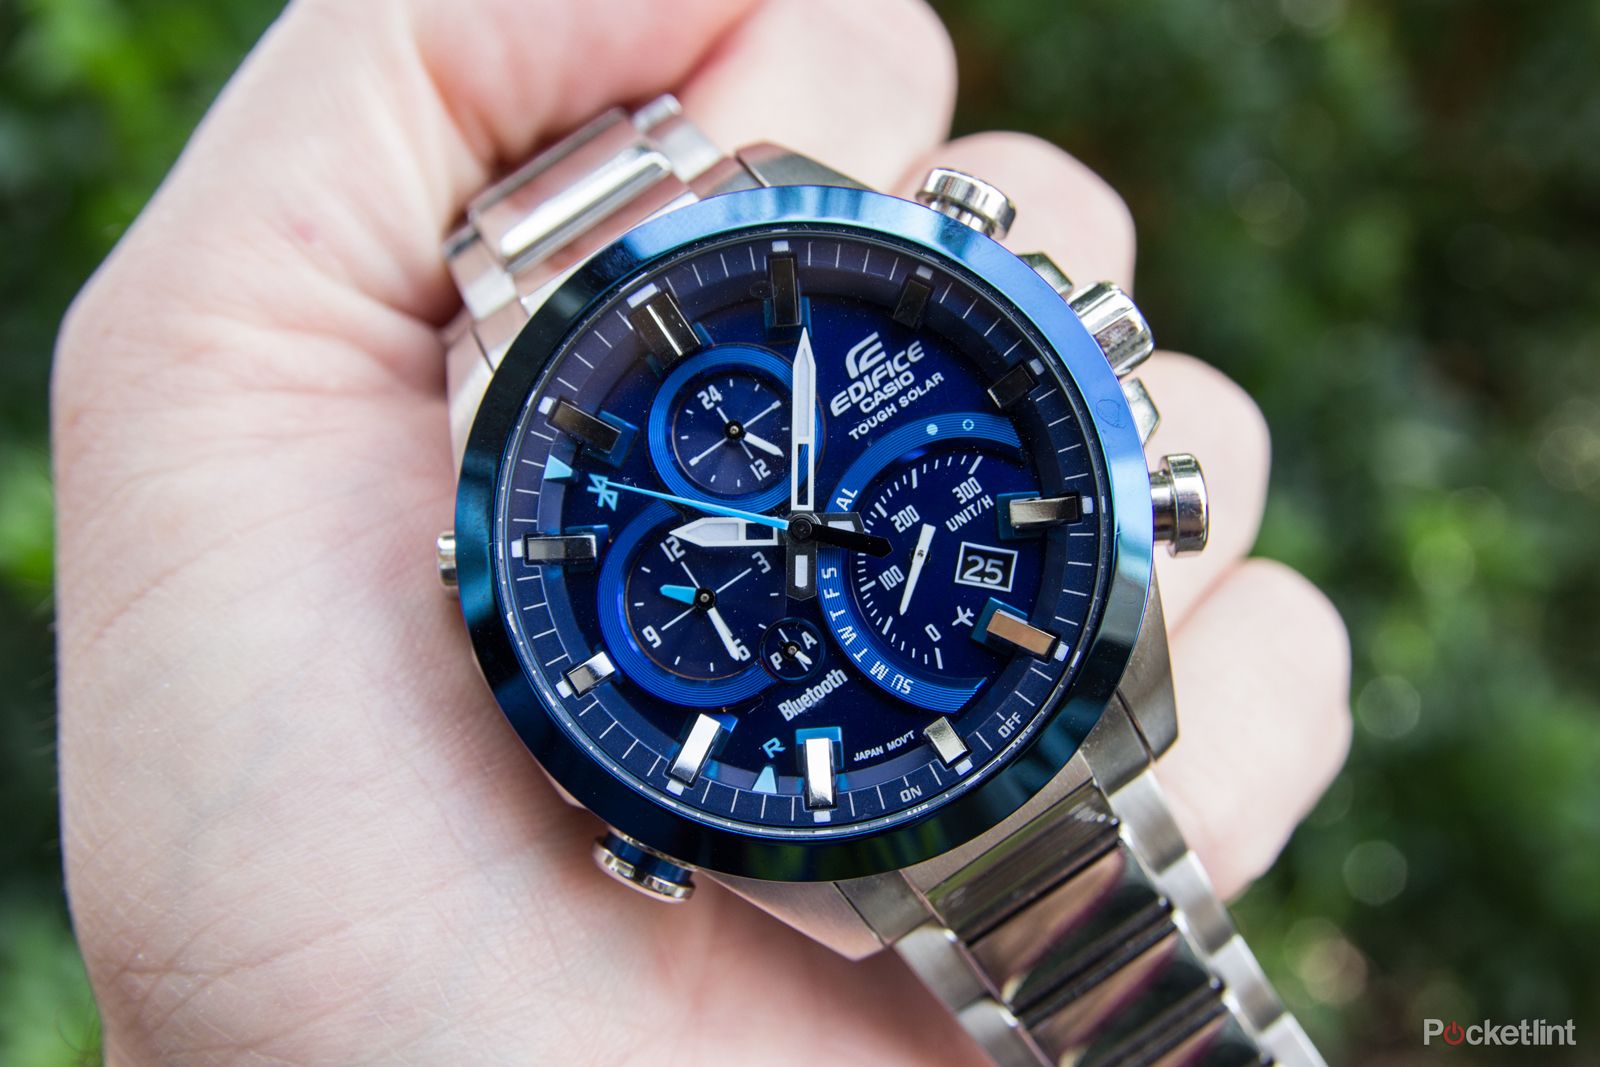 Casio Edifice EQB 500 Watch first connected device second